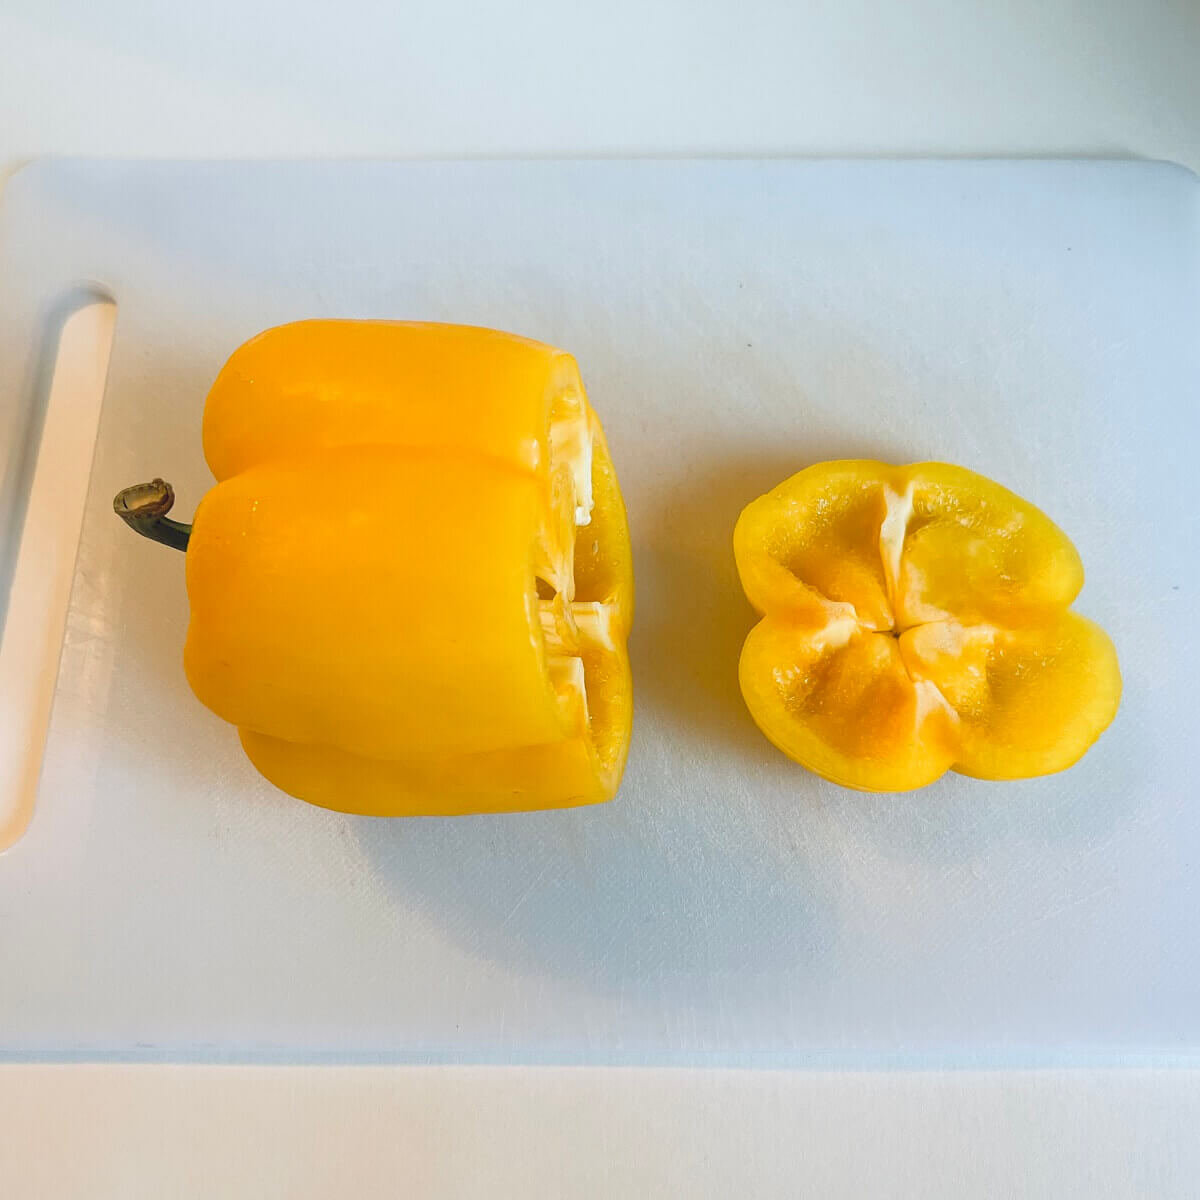 A yellow bell pepper with the bottom end cut off.